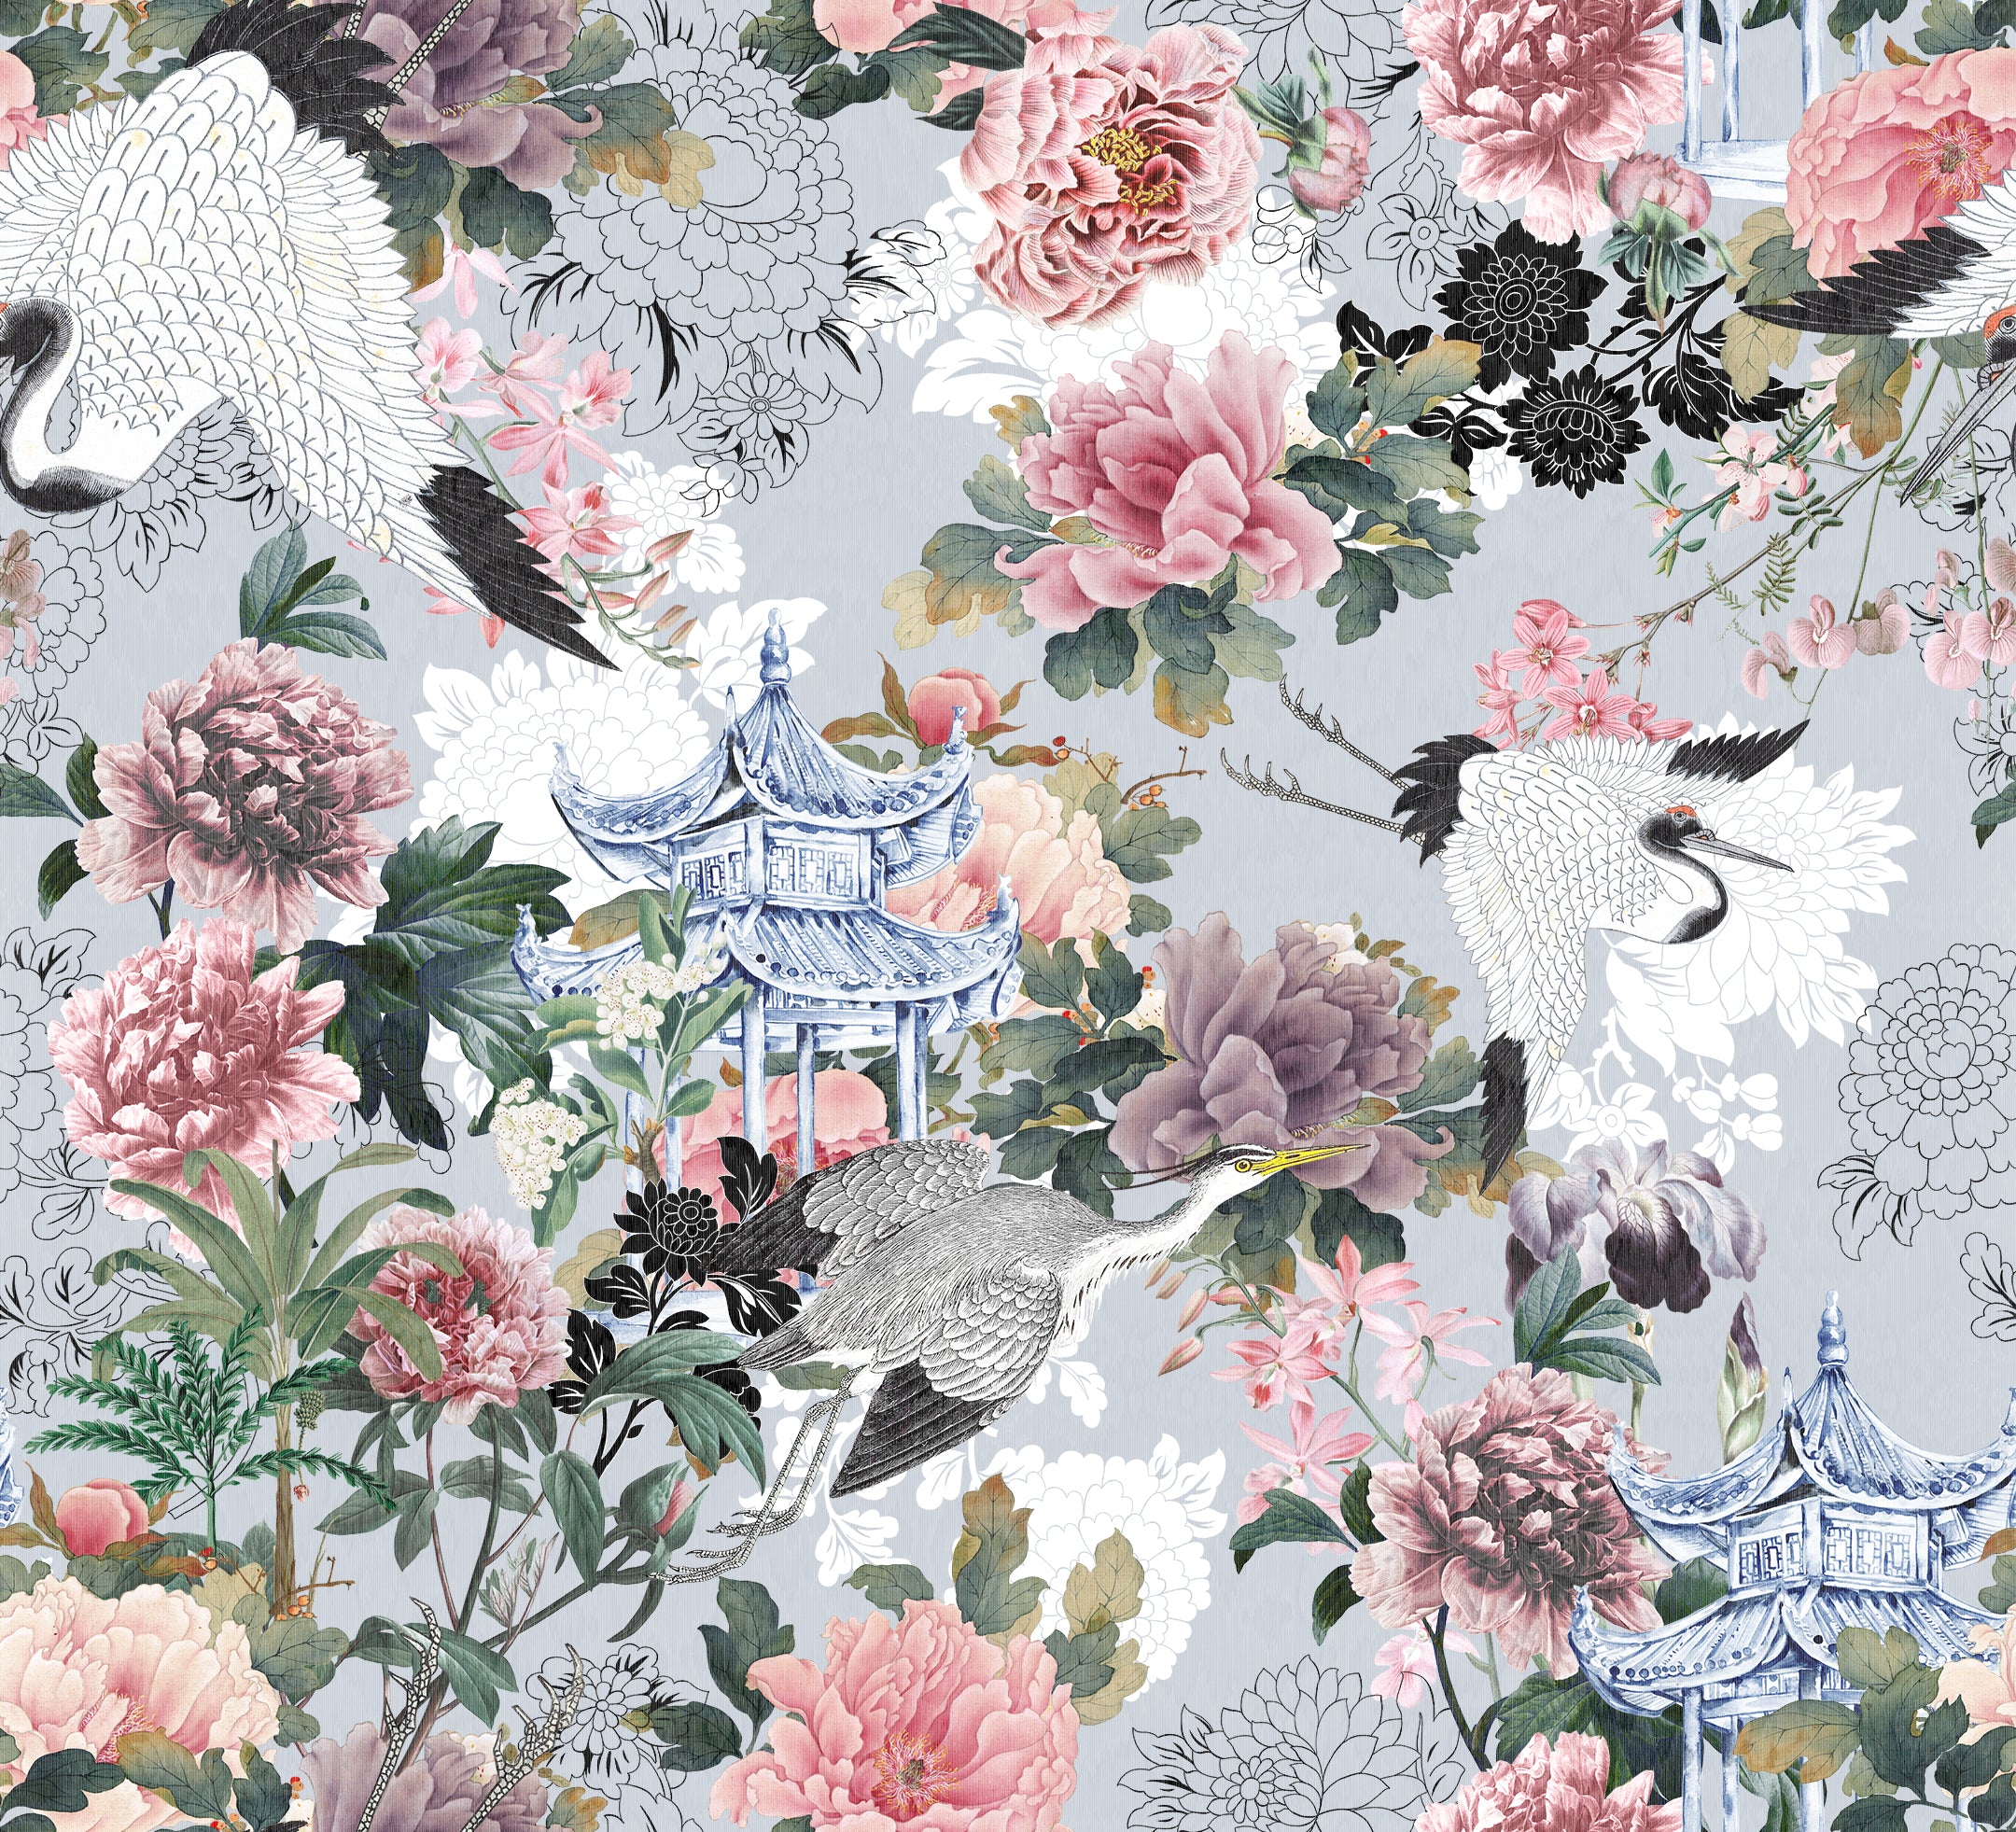 A detailed and vibrant wallpaper pattern featuring an elegant mix of peonies, cranes, and traditional Japanese architecture set against a pale grey background. This illustration captures the serene beauty of a stylized oriental garden